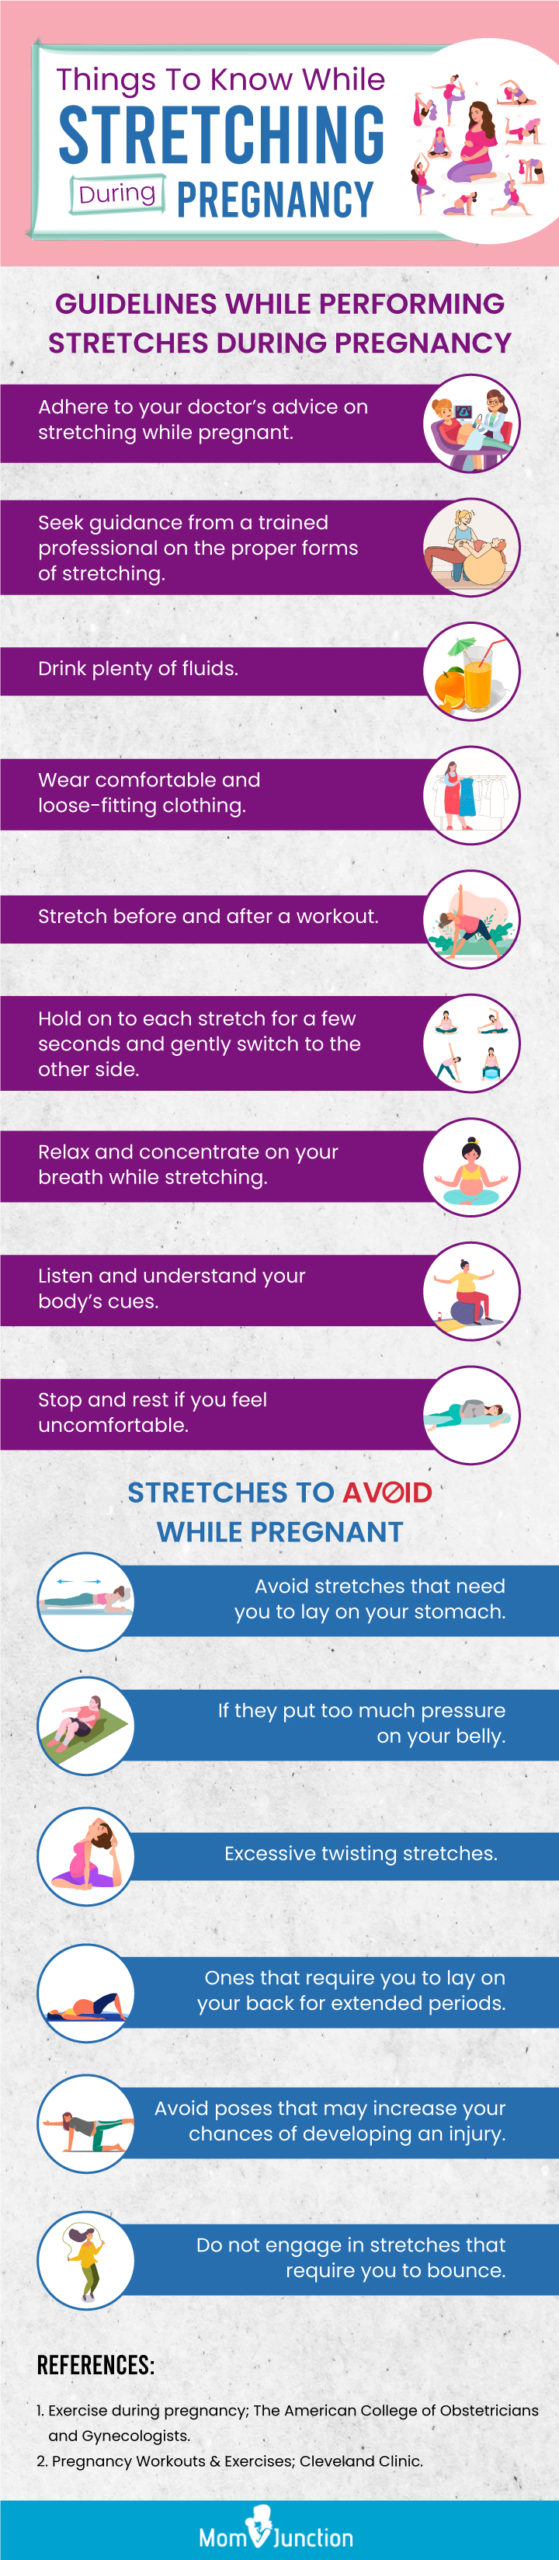 things to know while stretching during pregnancy (infographic)